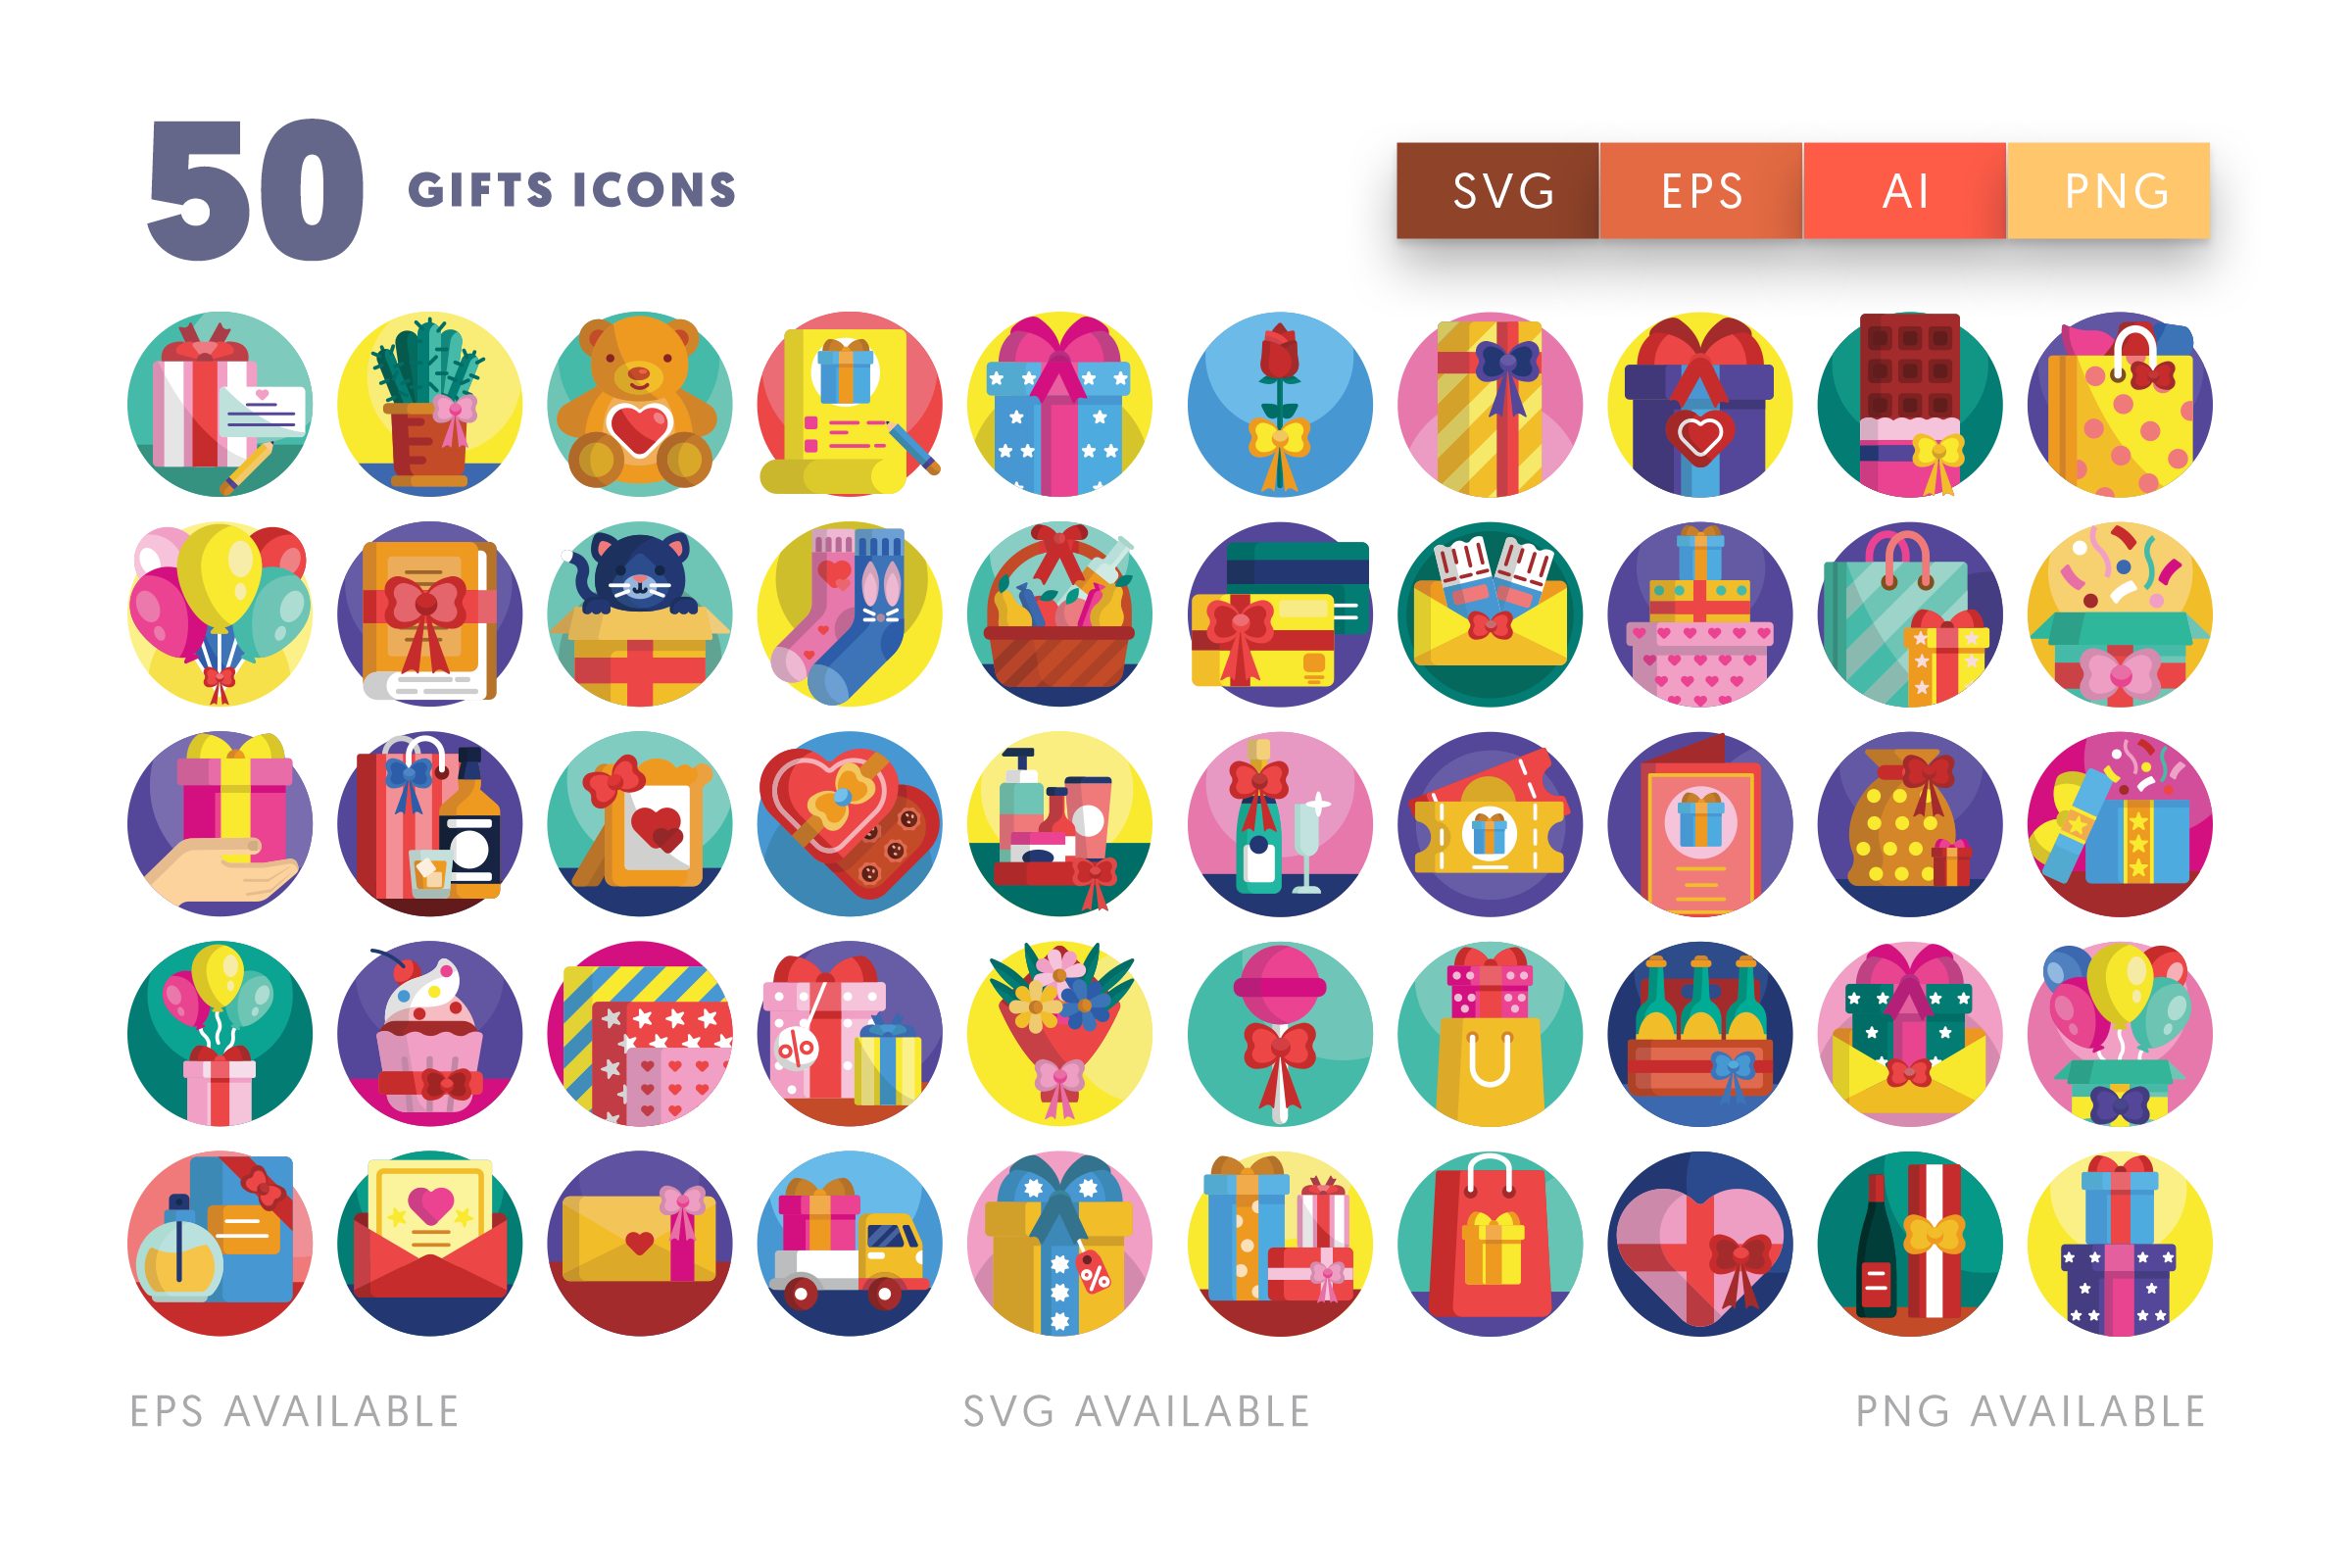 Gifts icons png/svg/eps